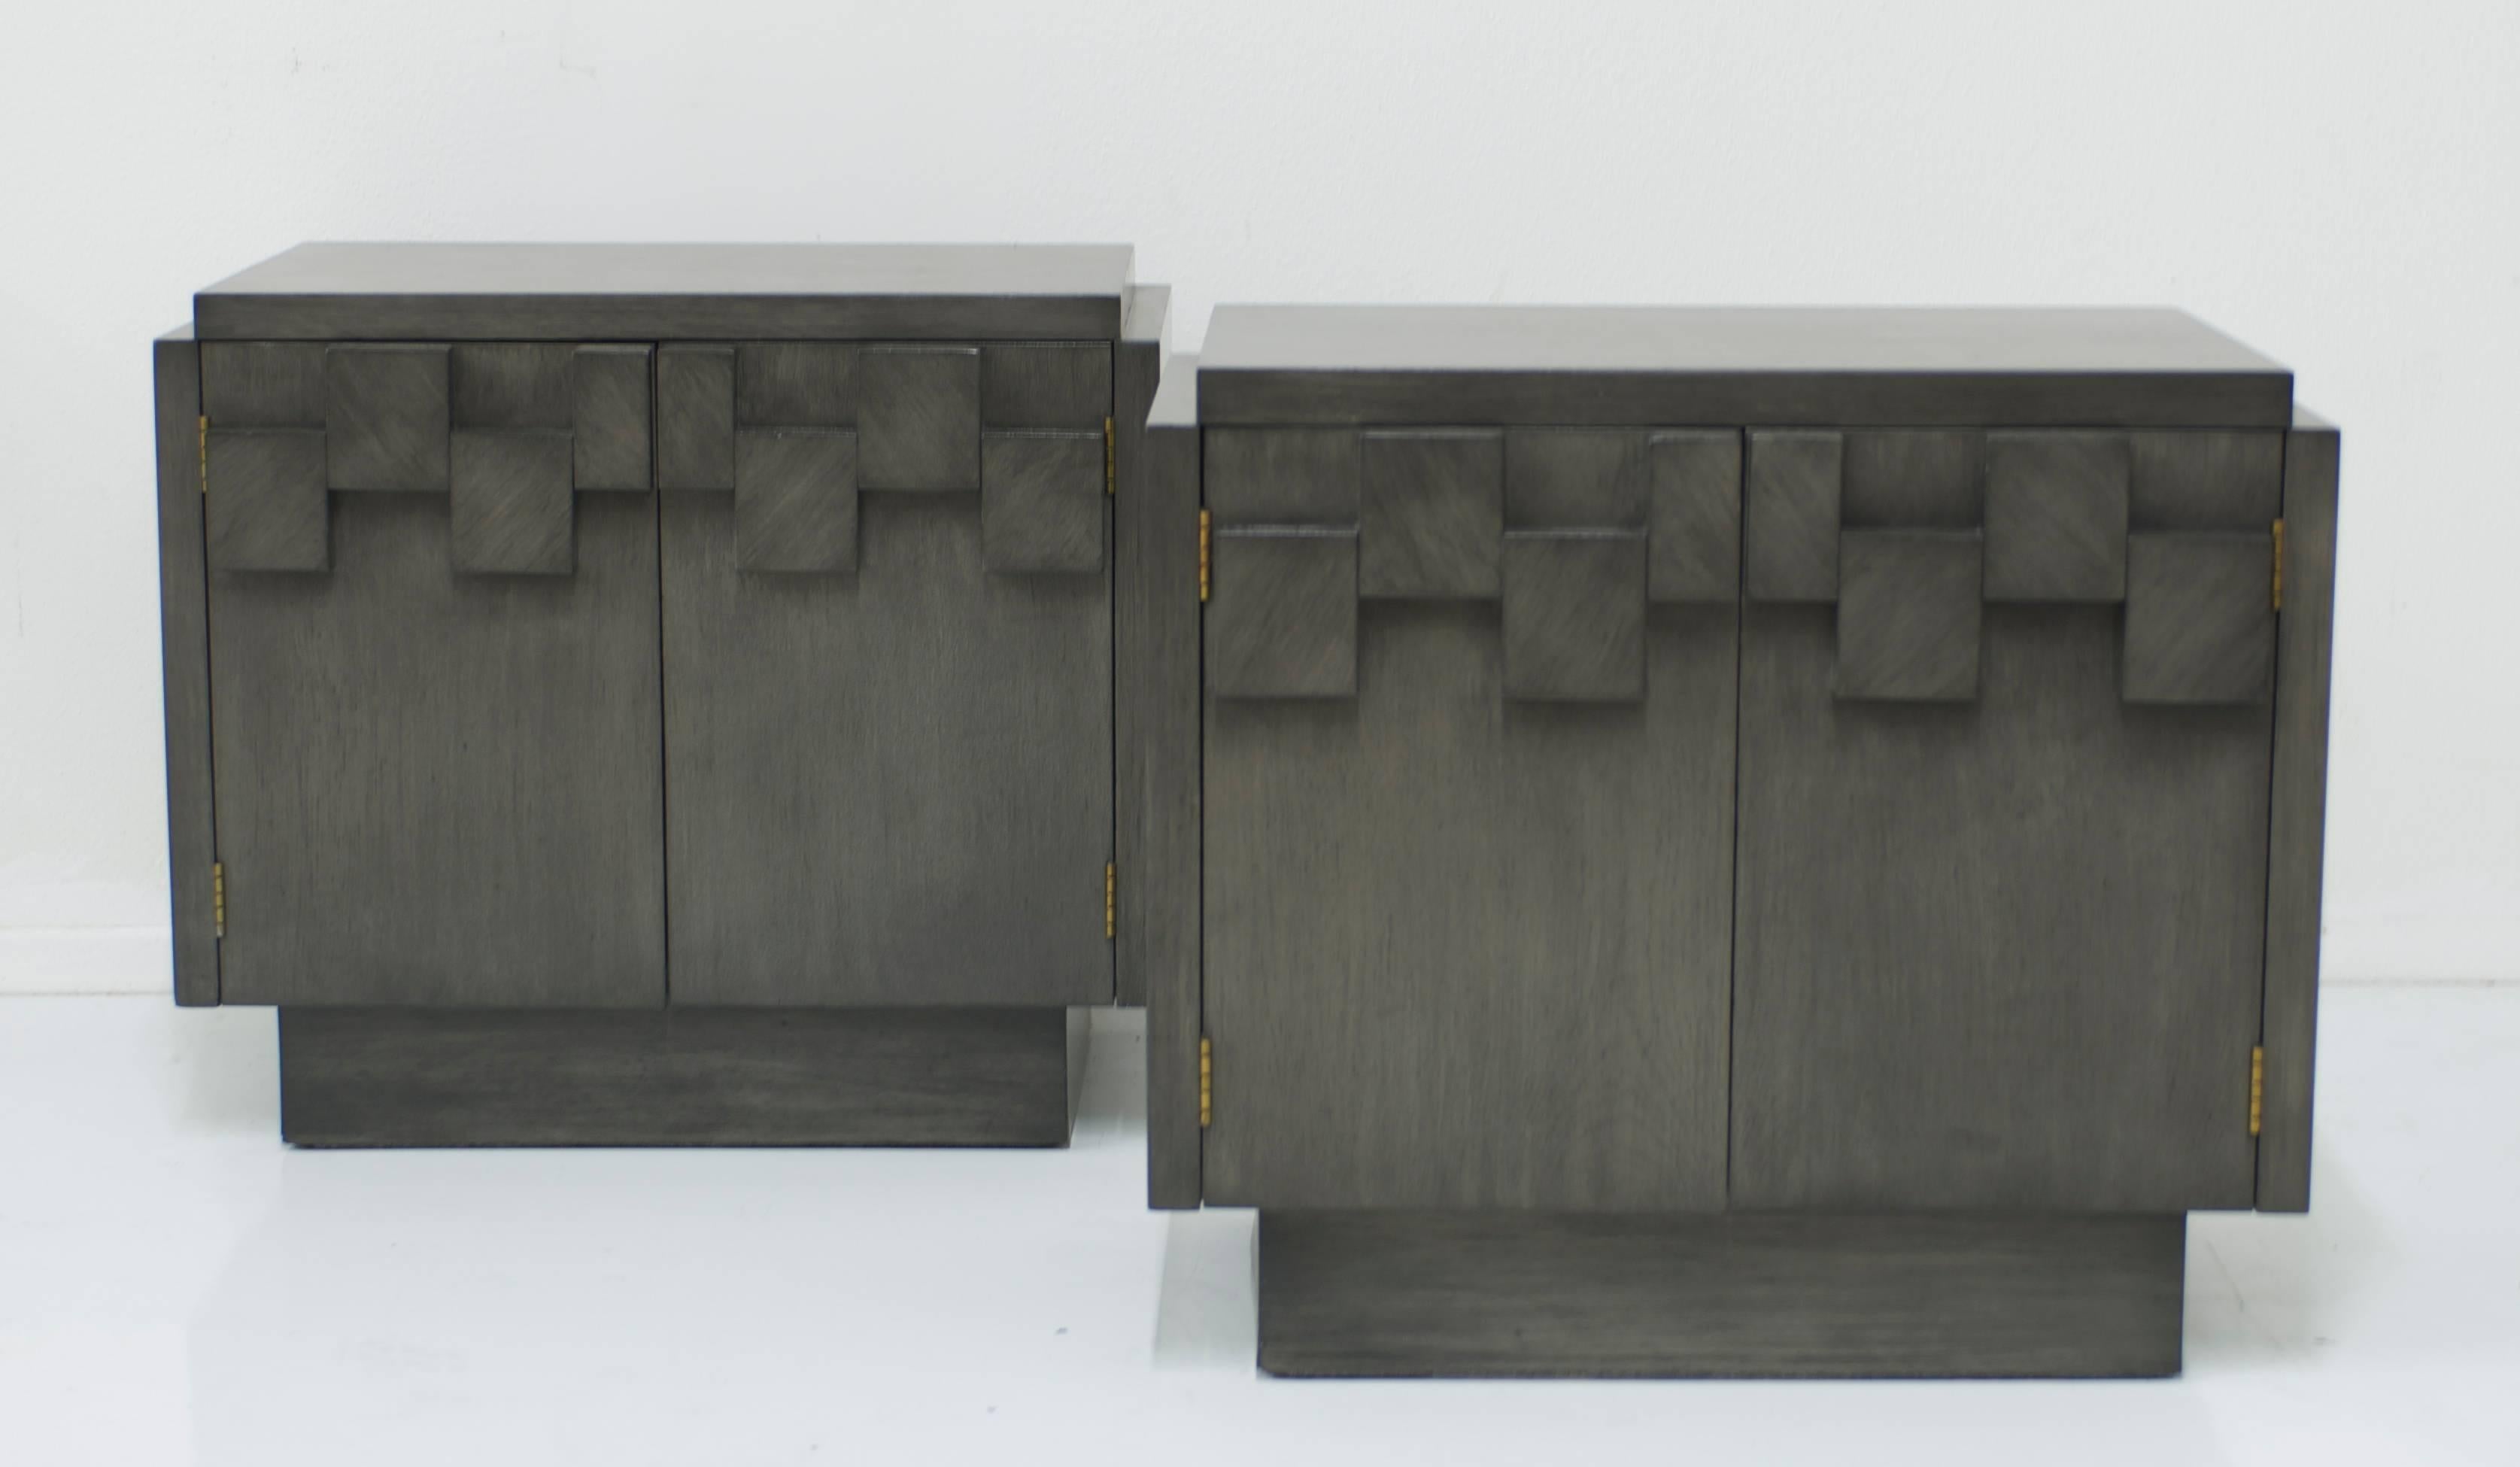 These brutalist bedside tables manufactured by Lane have been refinished in a custom charcoal grey finish that allows the grain of the oak show through. The result is handsome and effective in featuring the geometry on the facia of the drawer